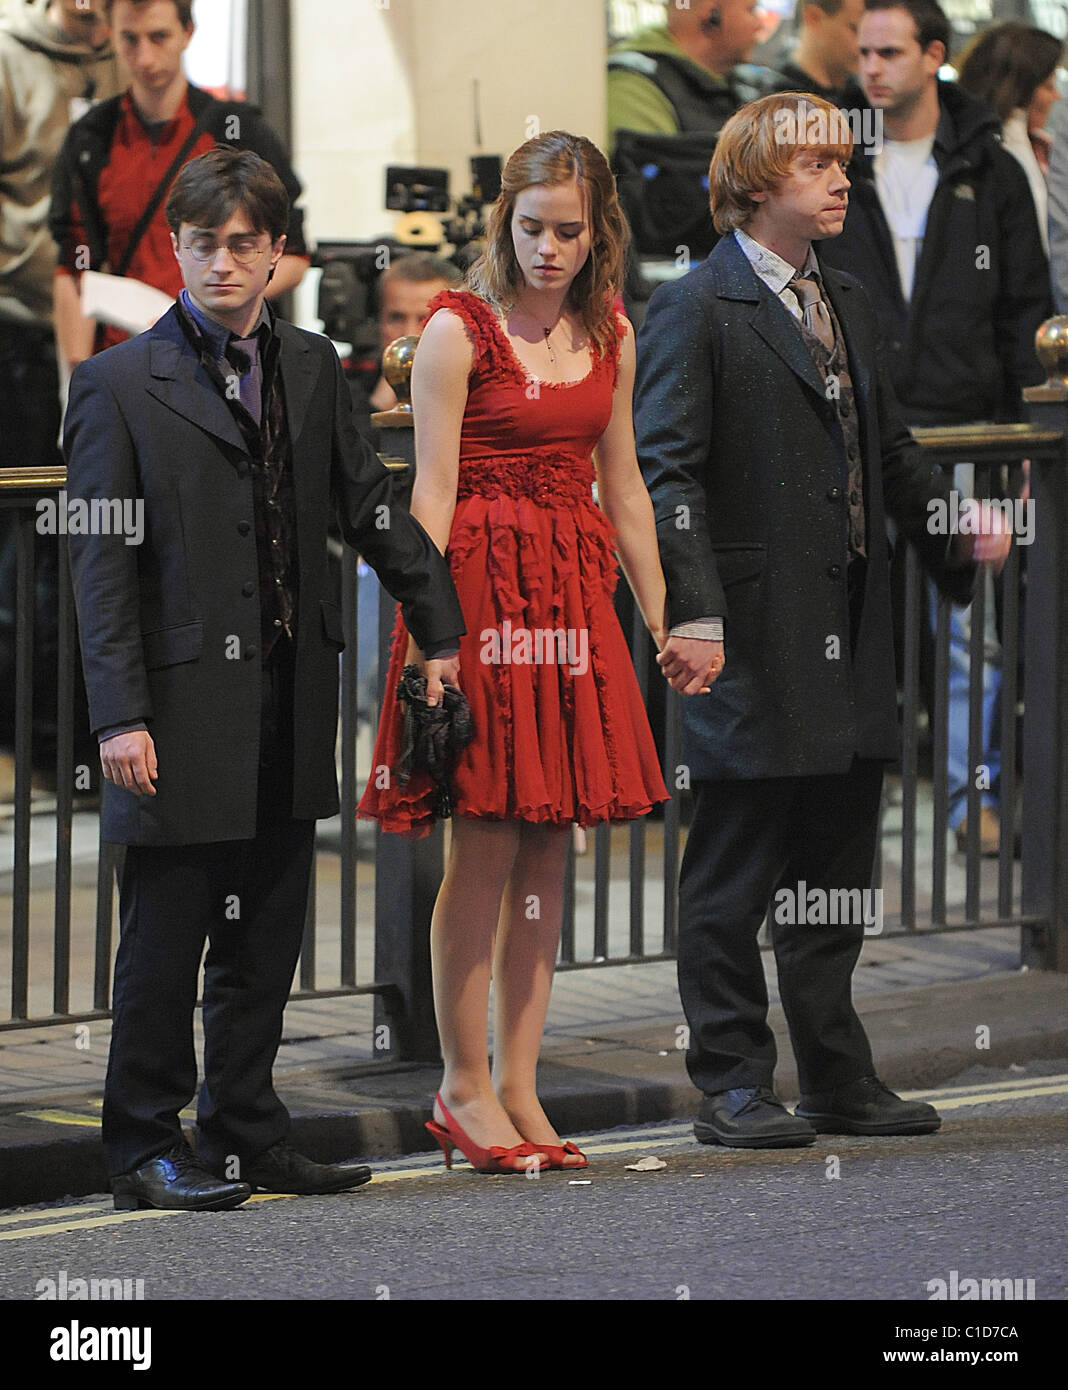 Daniel Radcliffe, Emma Watson and Rupert Grint bring the West End to a standstill as they film scenes for the last movie in the Stock Photo